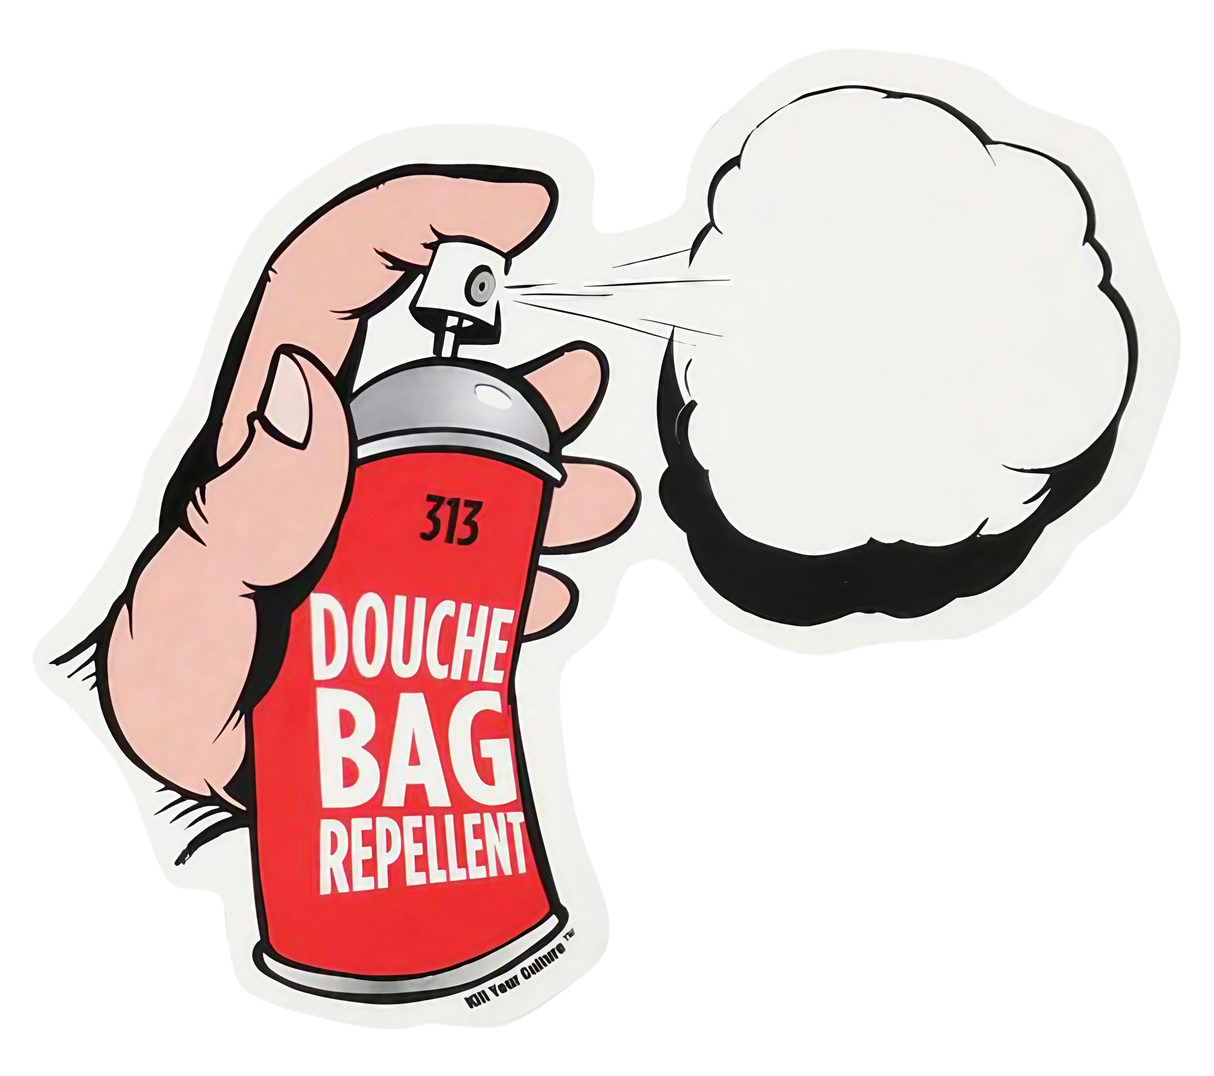 Douche Bag Repellent vinyl sticker resembling a spray can, 5" x 3.25", front view on white background